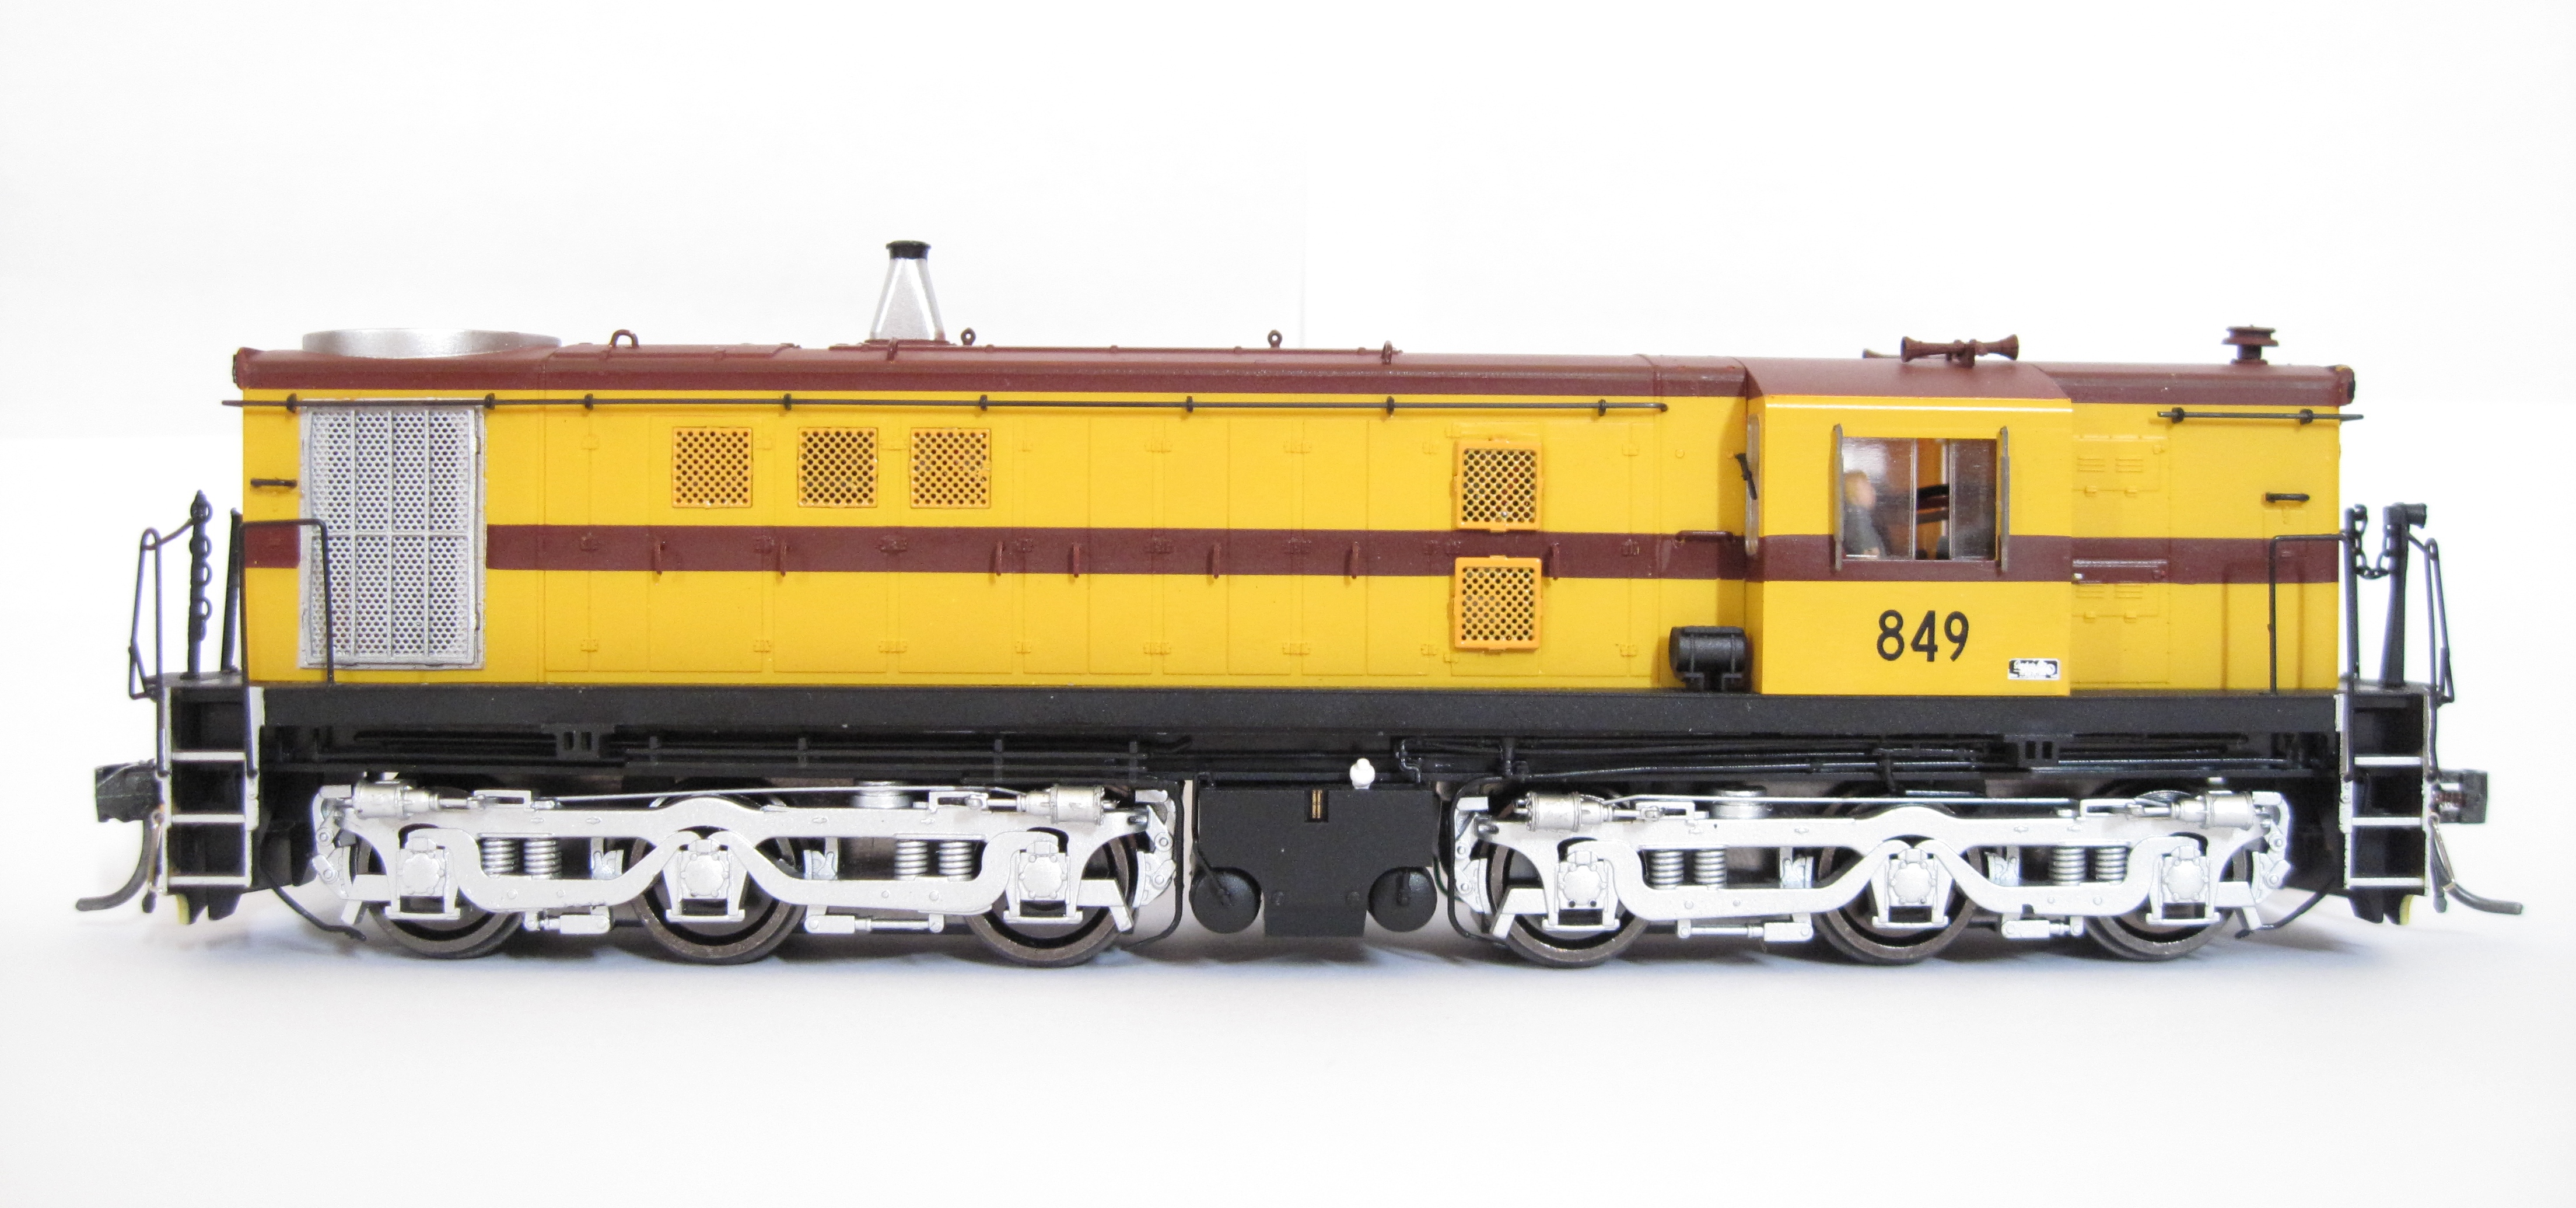 Trainorama 48 Class, 830 Class and GM Class Specials will be extended until 30th of June  2016